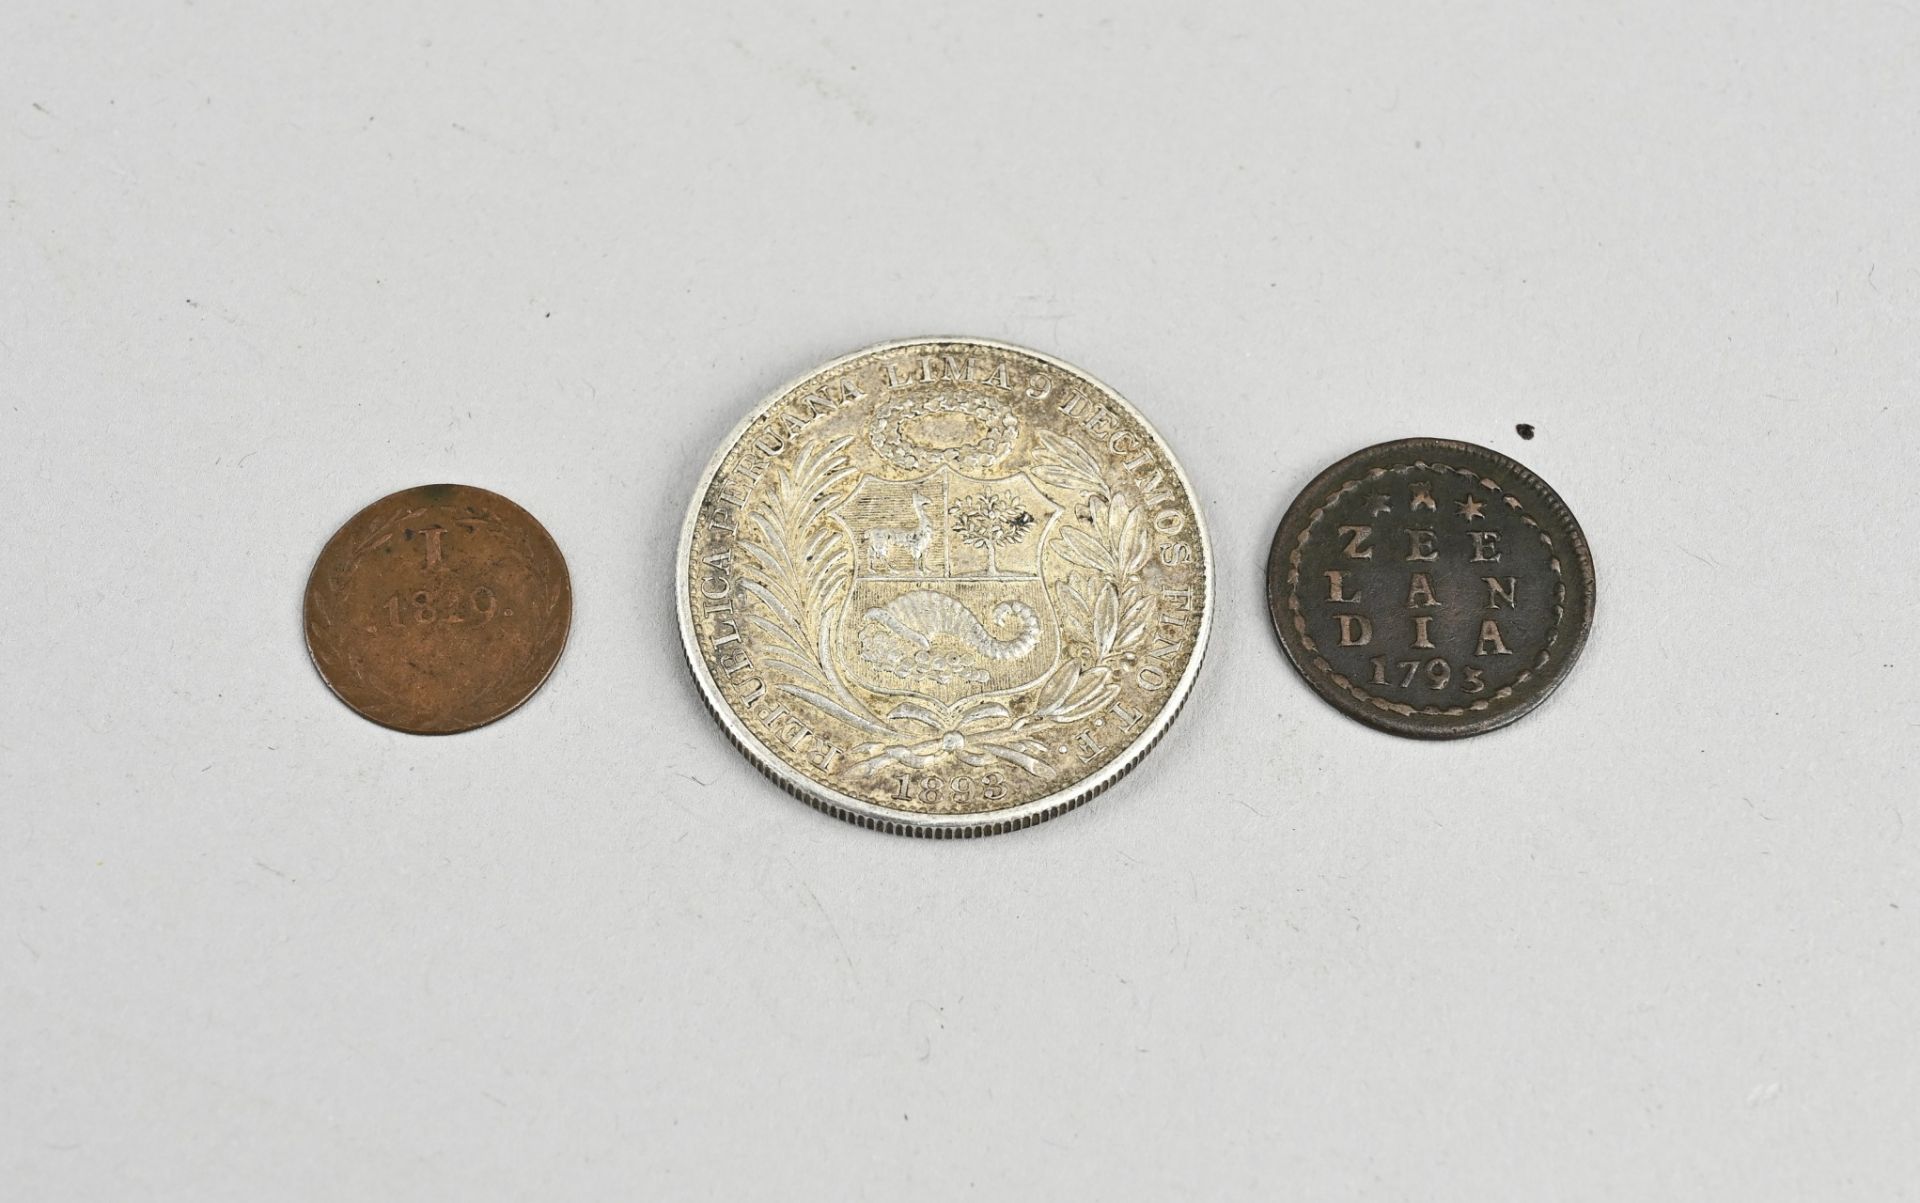 Lot with 3 coins